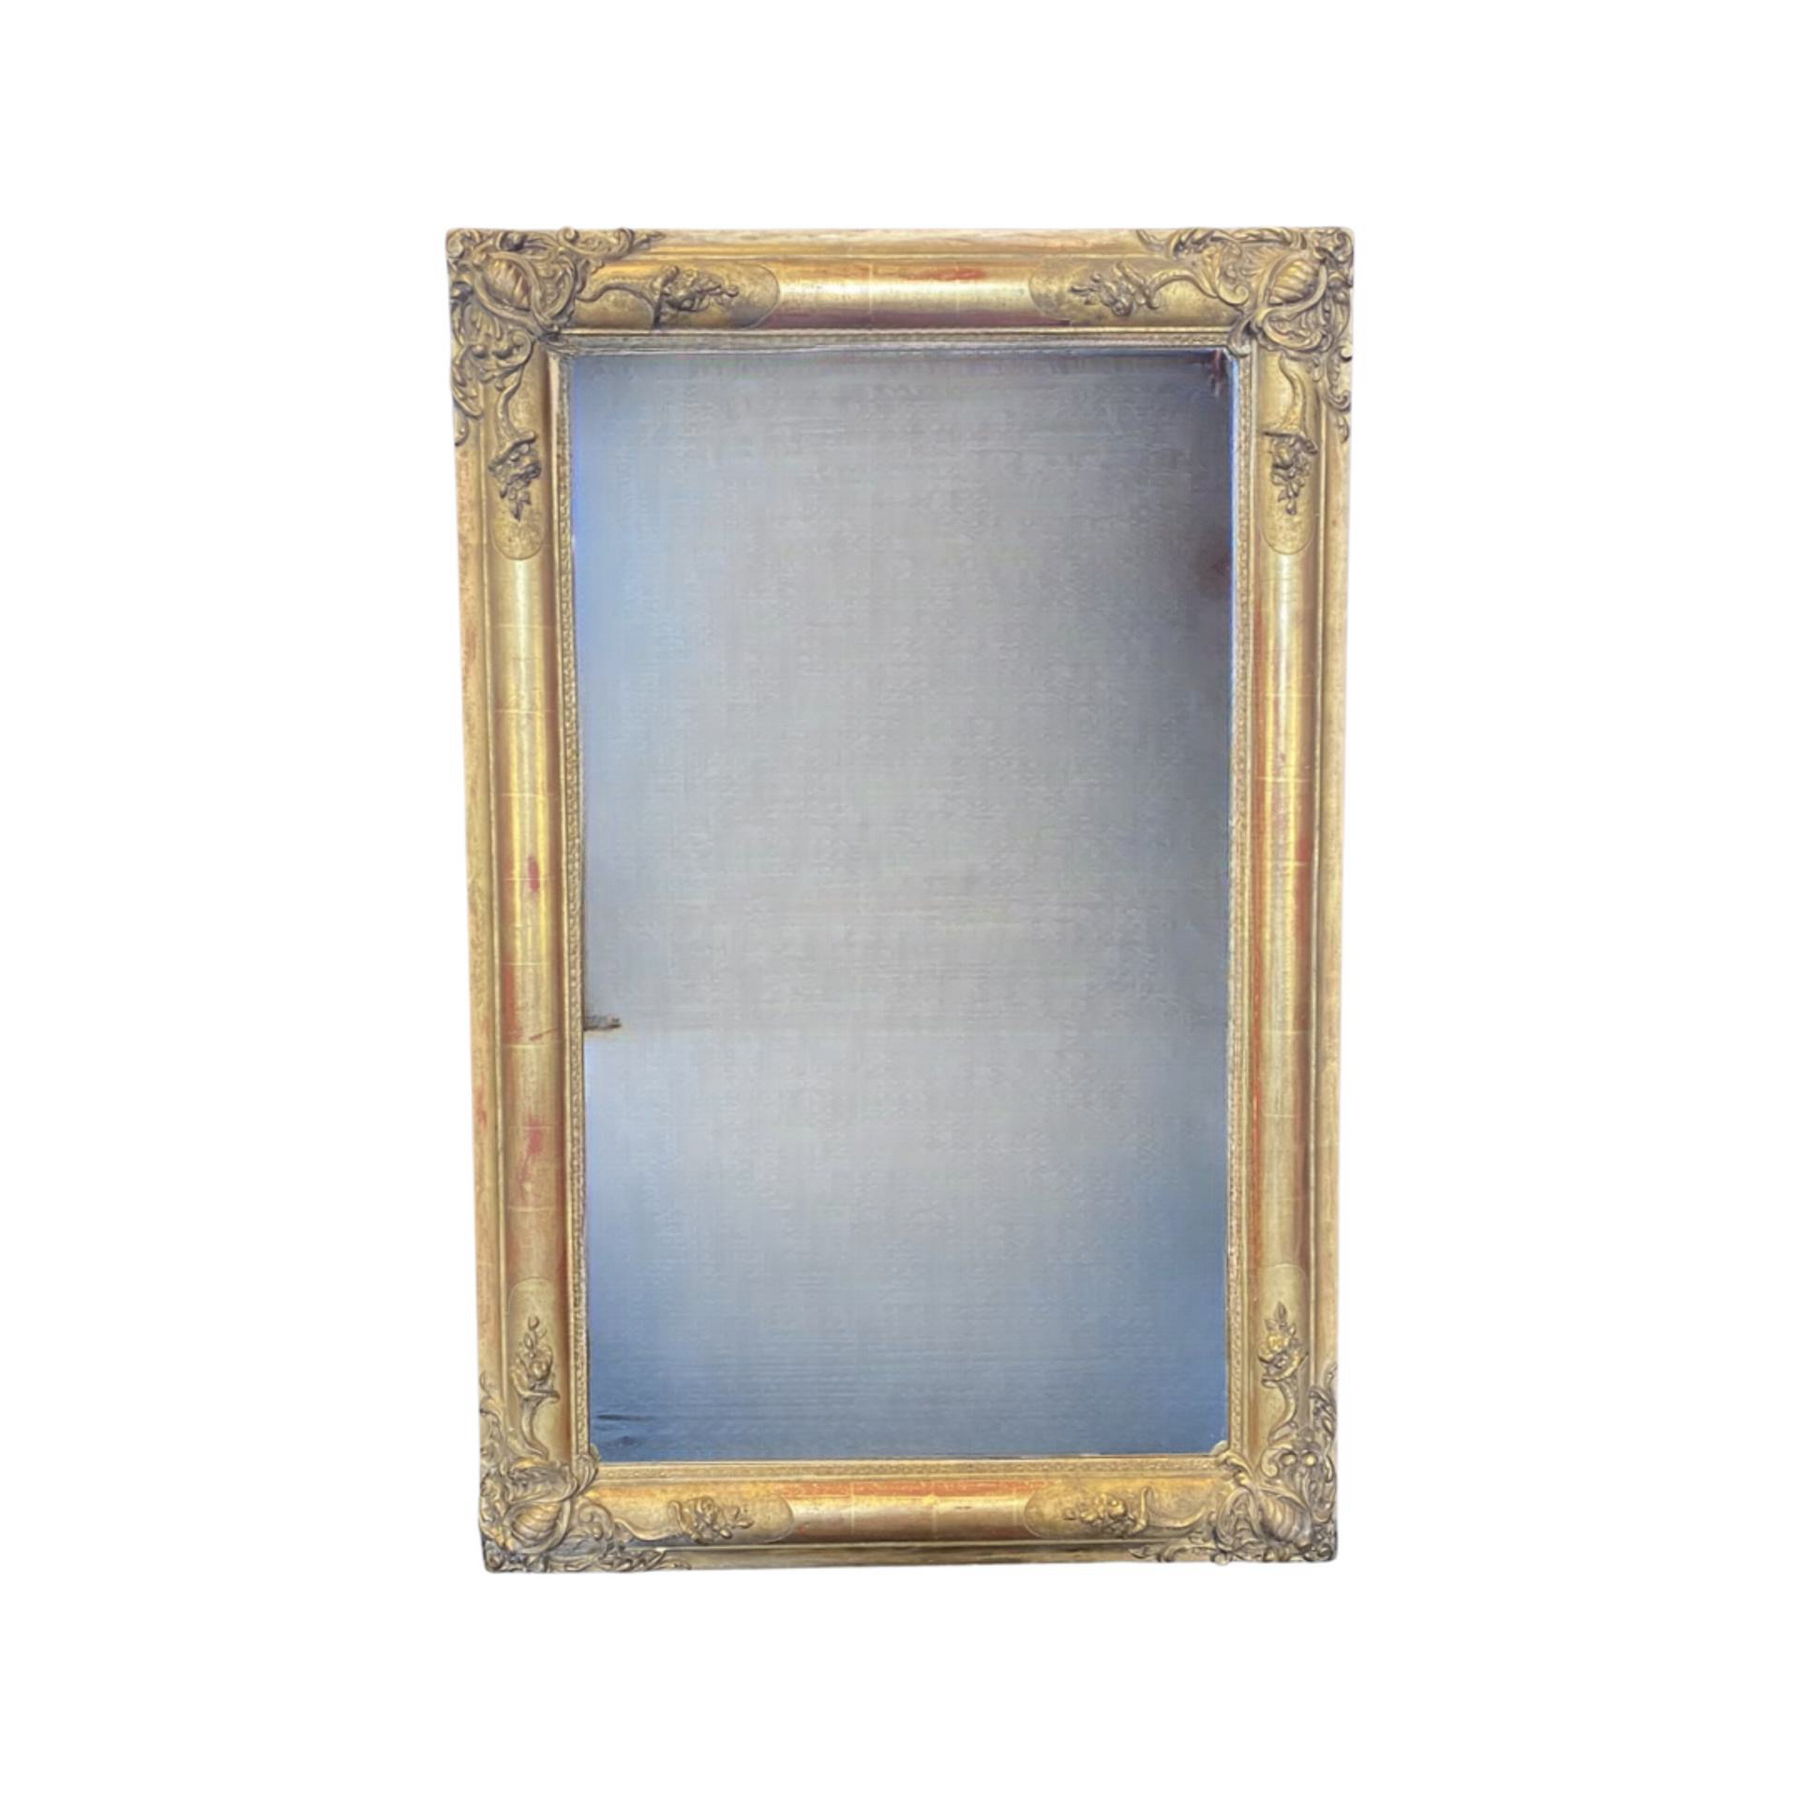 — Art 19th Antiquing Renaissance Century Neoclassical of Early French The Gold Gilt Mirror fr